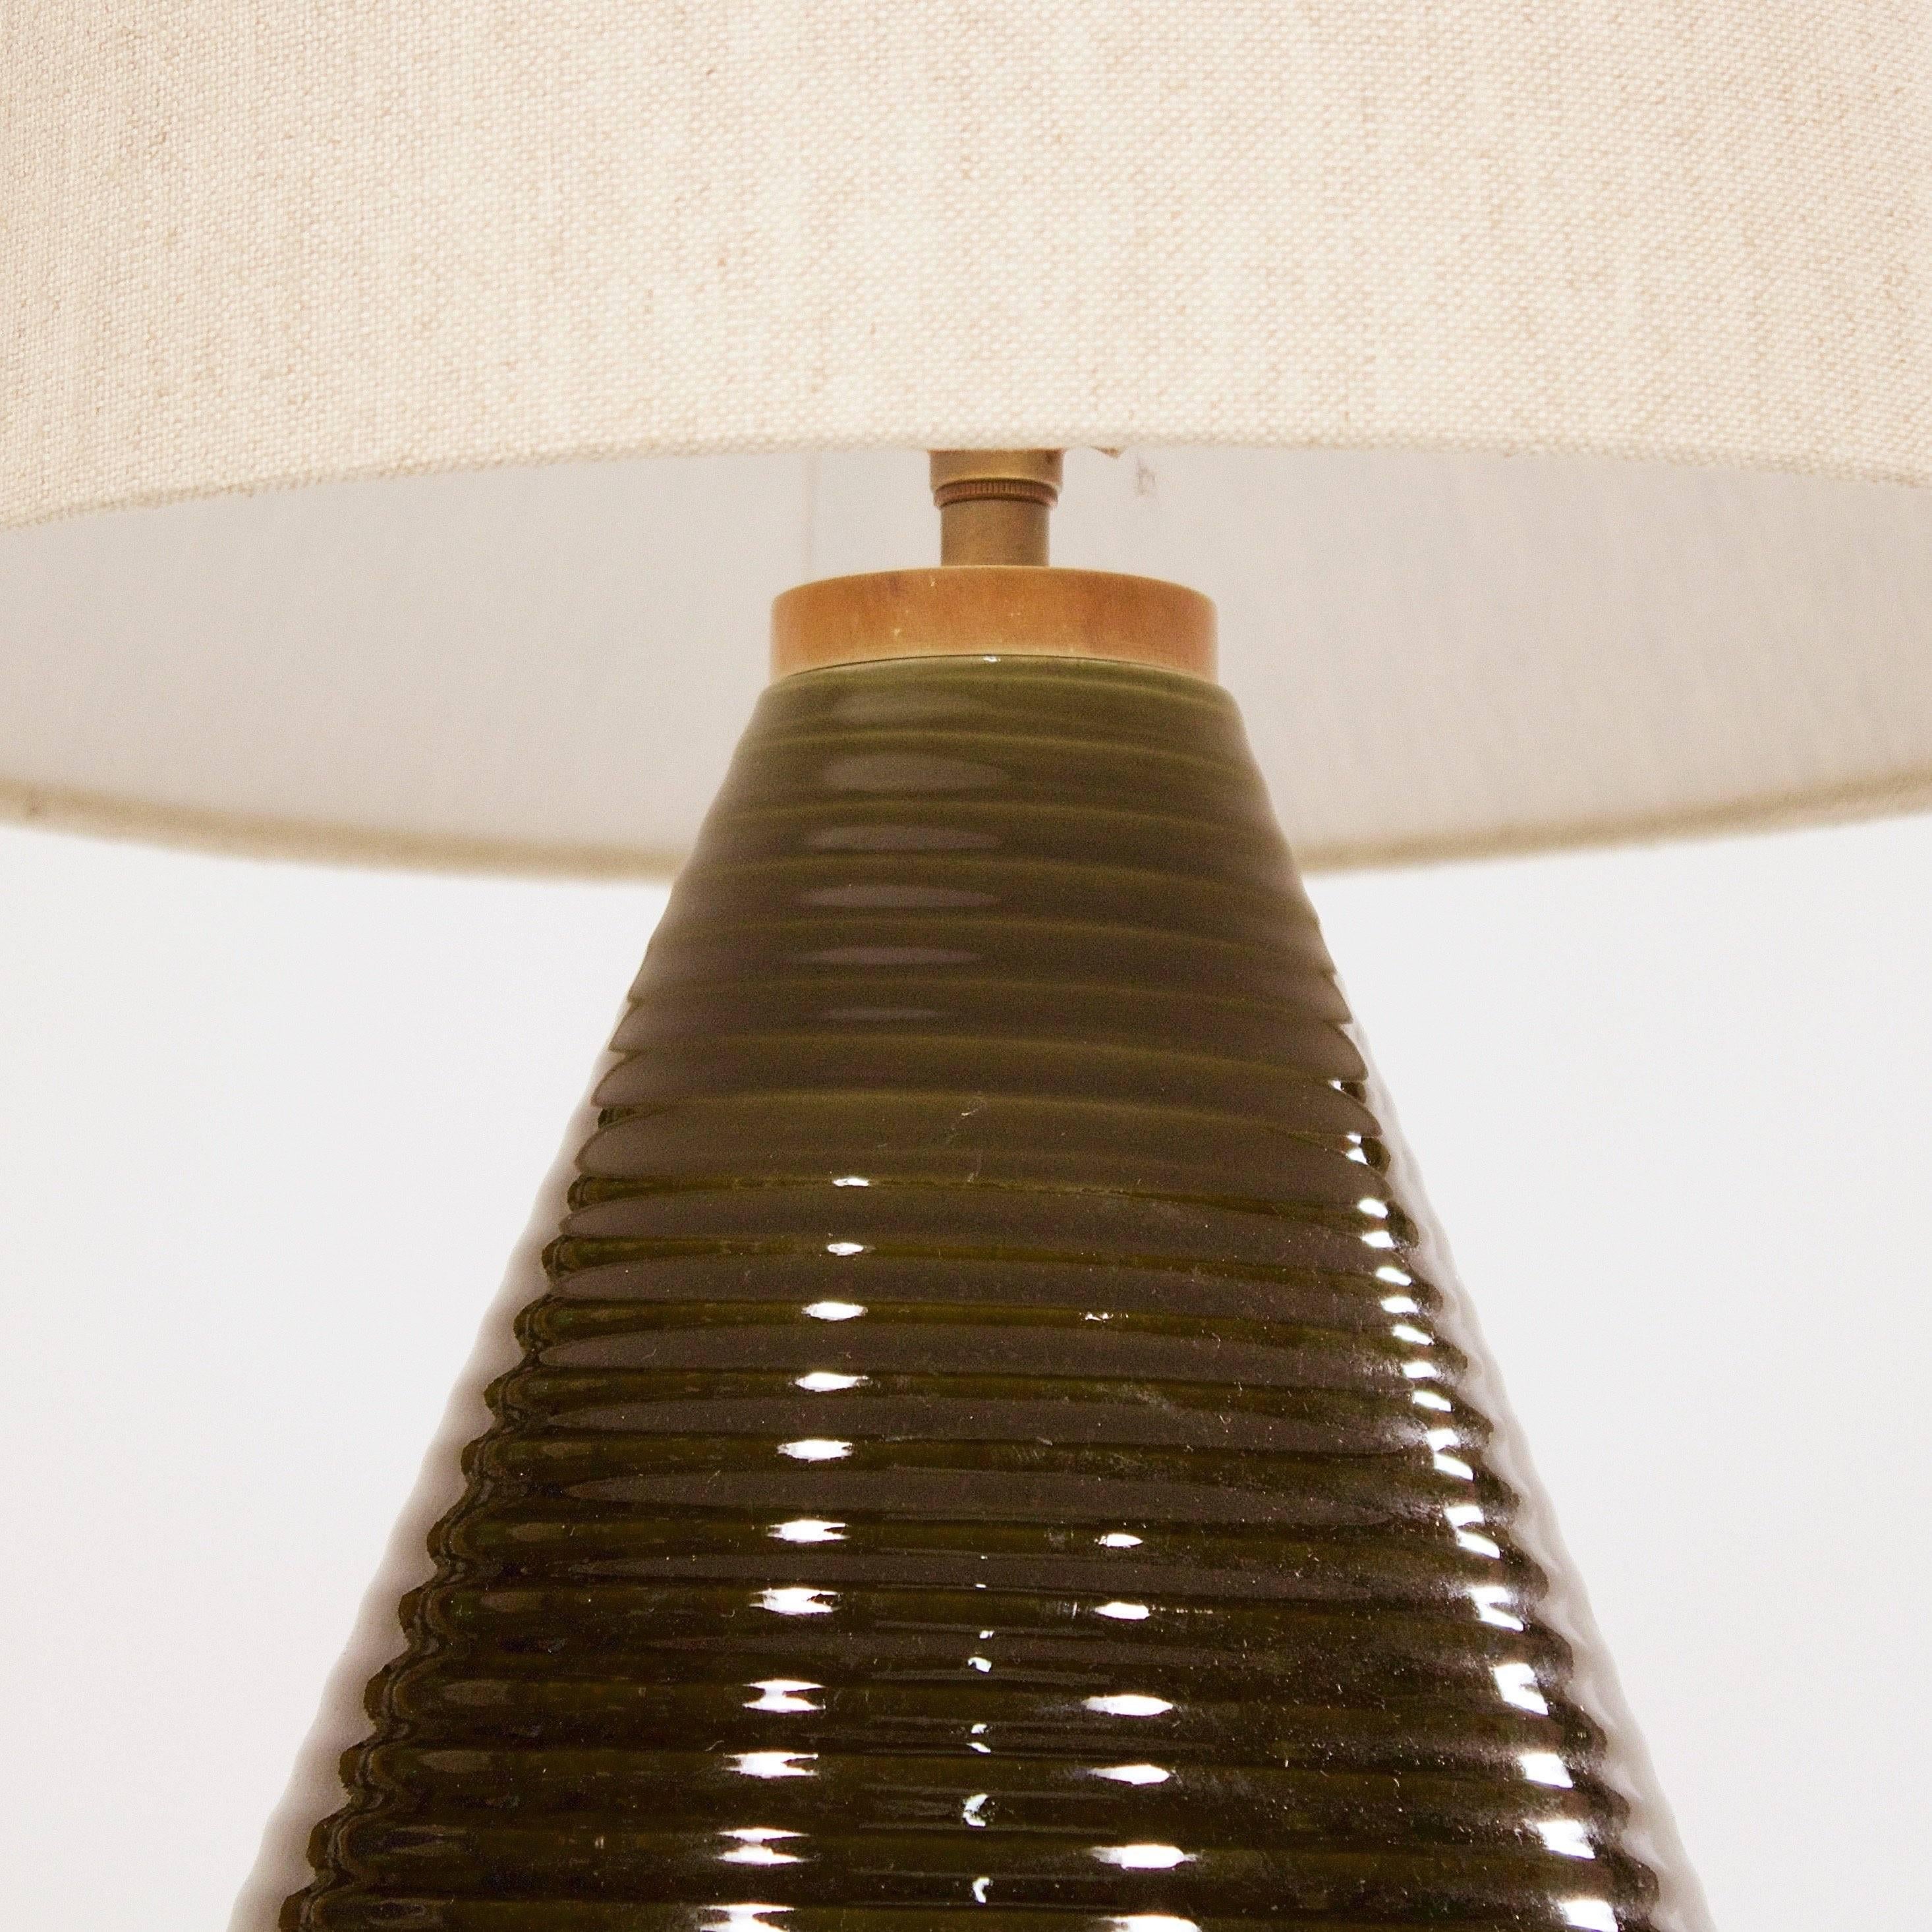 Swedish Stoneware Cone Shaped Table Lamp by Marianne Westman 1928-2017